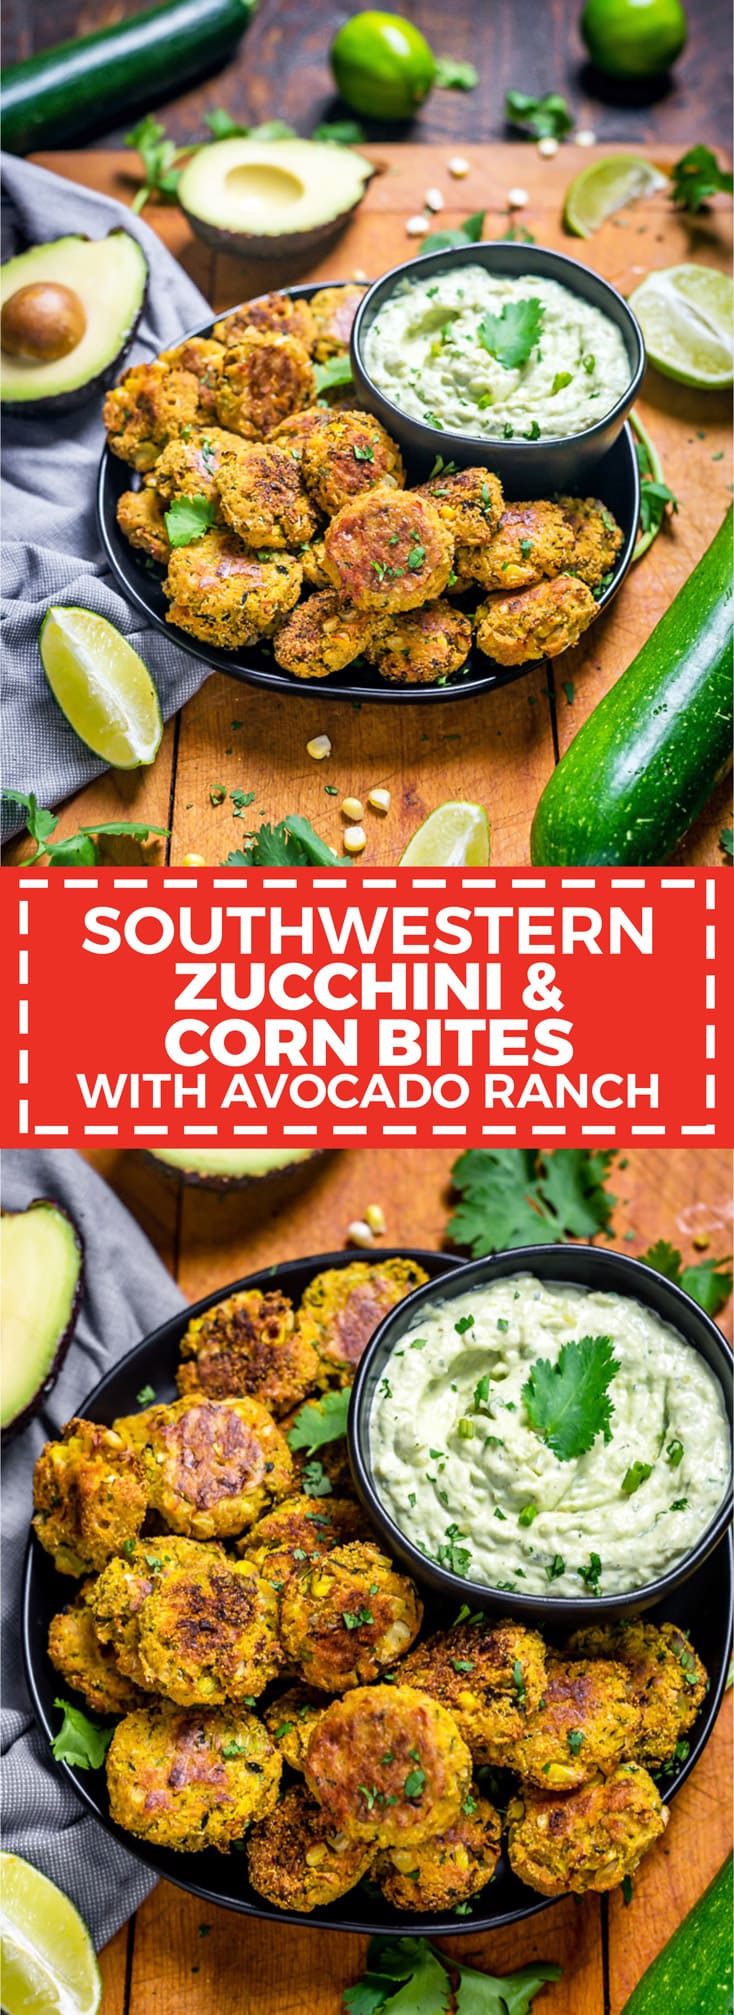 Southwestern Zucchini and Corn Bites with Avocado Ranch. No need to break out the fryer for this (conveniently gluten-free) recipe-- these bite-sized, veggie-loaded treats are baked until crisp on the outside and tender on the inside. | hostthetoast.com